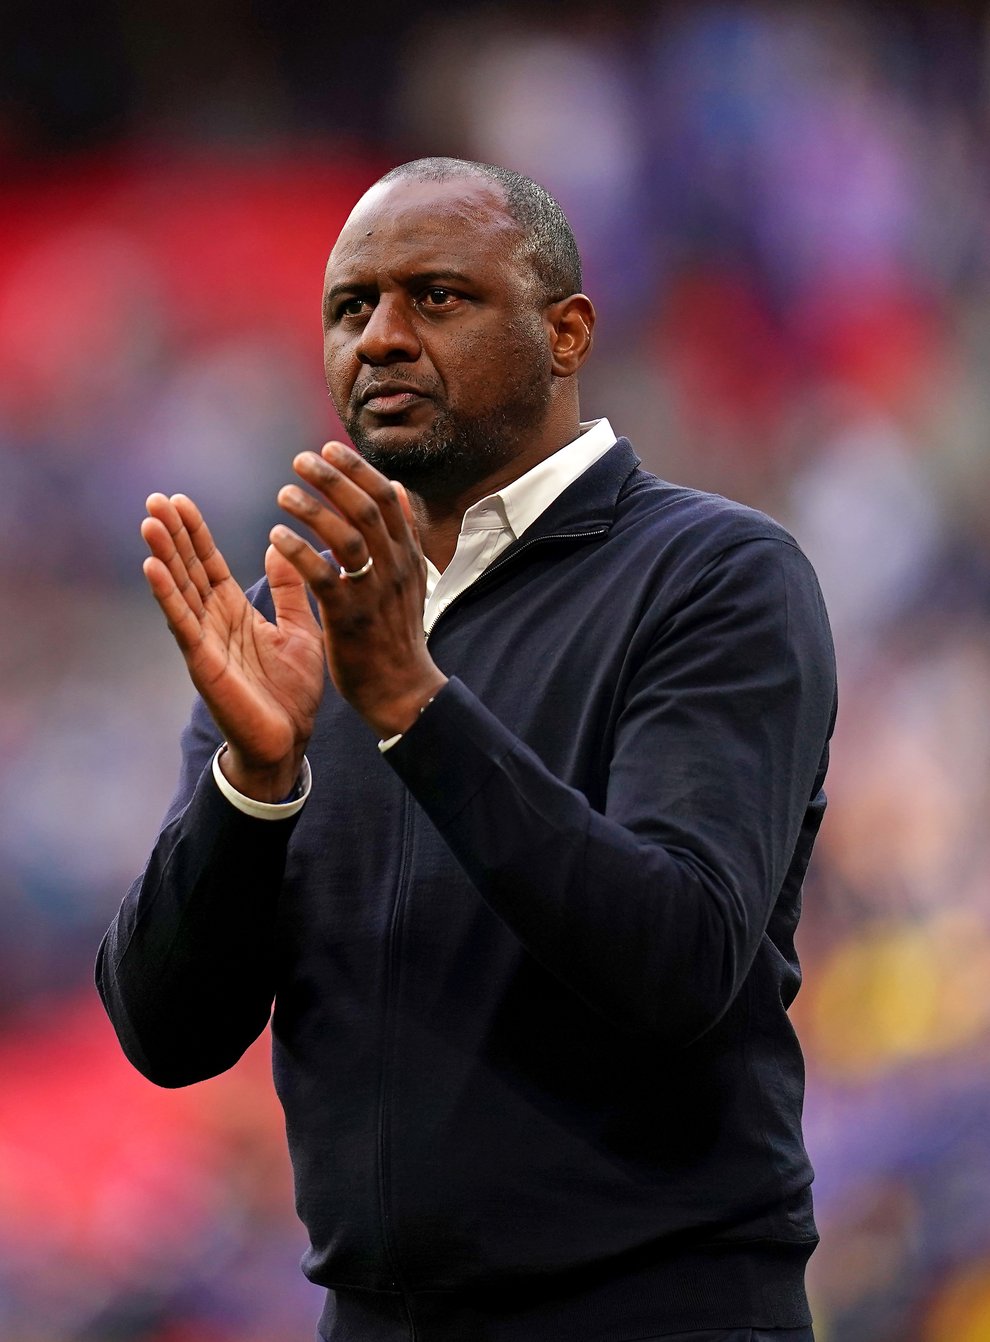 Patrick Vieira believes a number of the Watford players will be “playing for their careers” when they visit Selhurst Park (John Walton/PA)